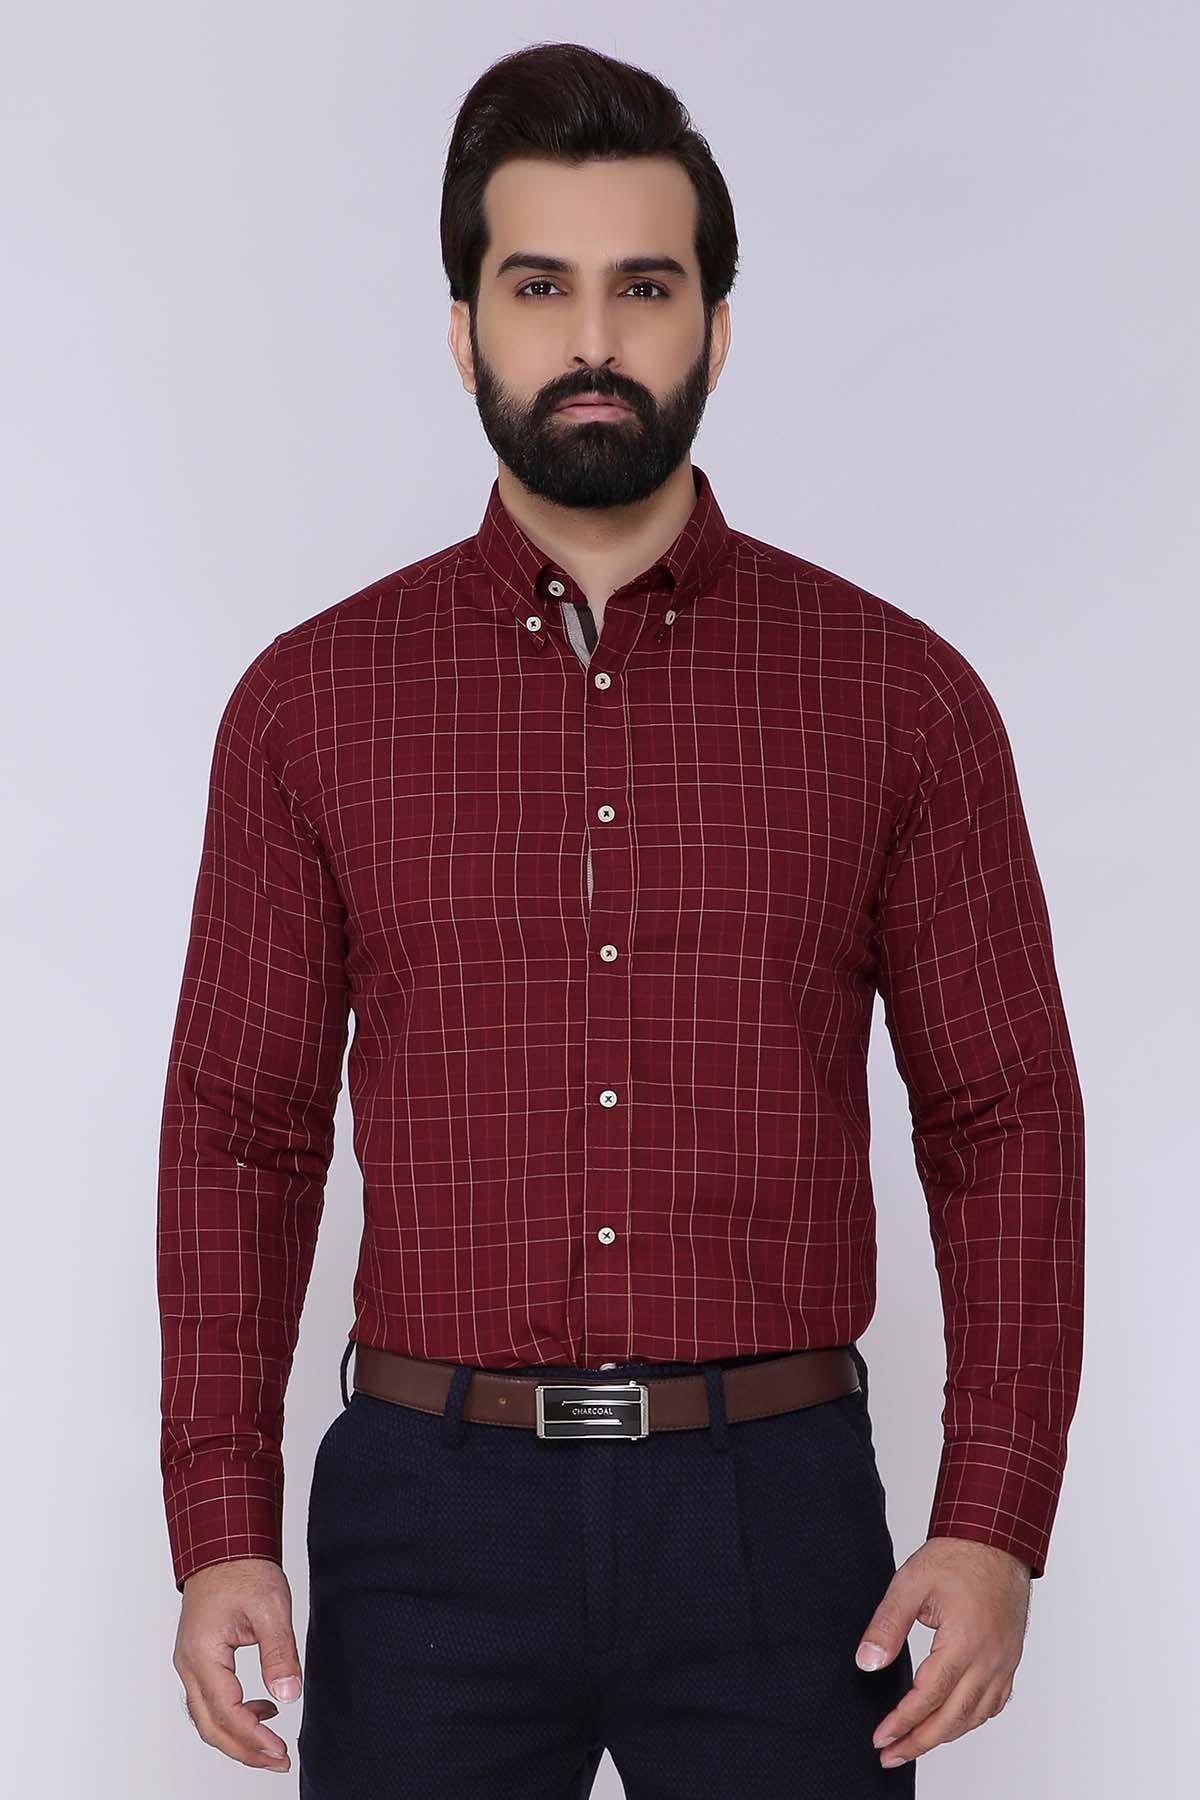 SEMI FORMAL SHIRTS BUTTON DOWN WINTER FULL SLEEVE MAROON at Charcoal Clothing